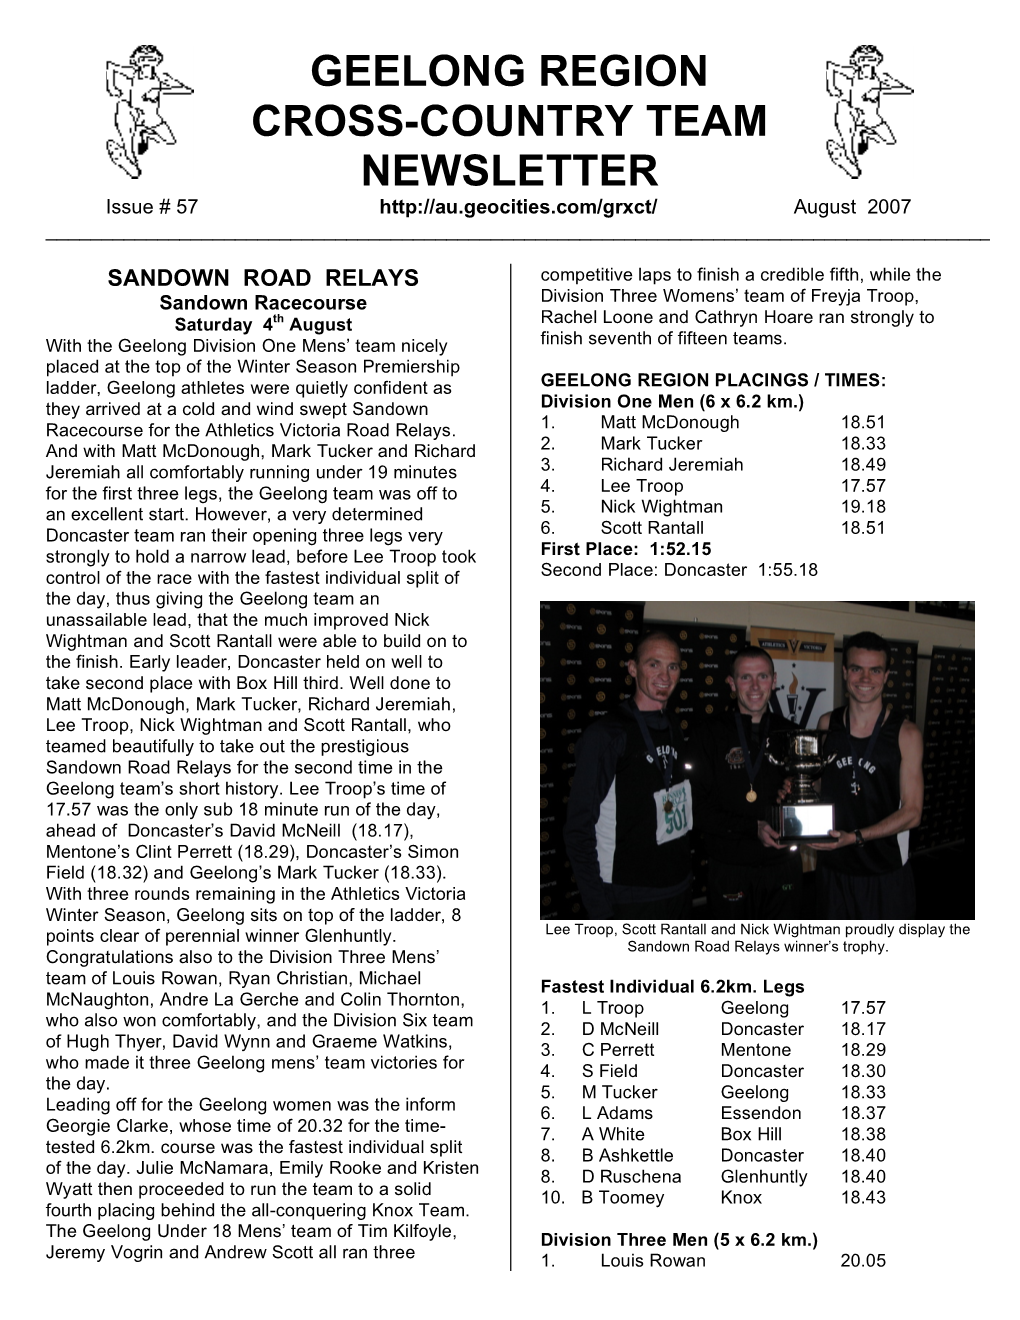 GEELONG REGION CROSS-COUNTRY TEAM NEWSLETTER Issue # 57 August 2007 ______